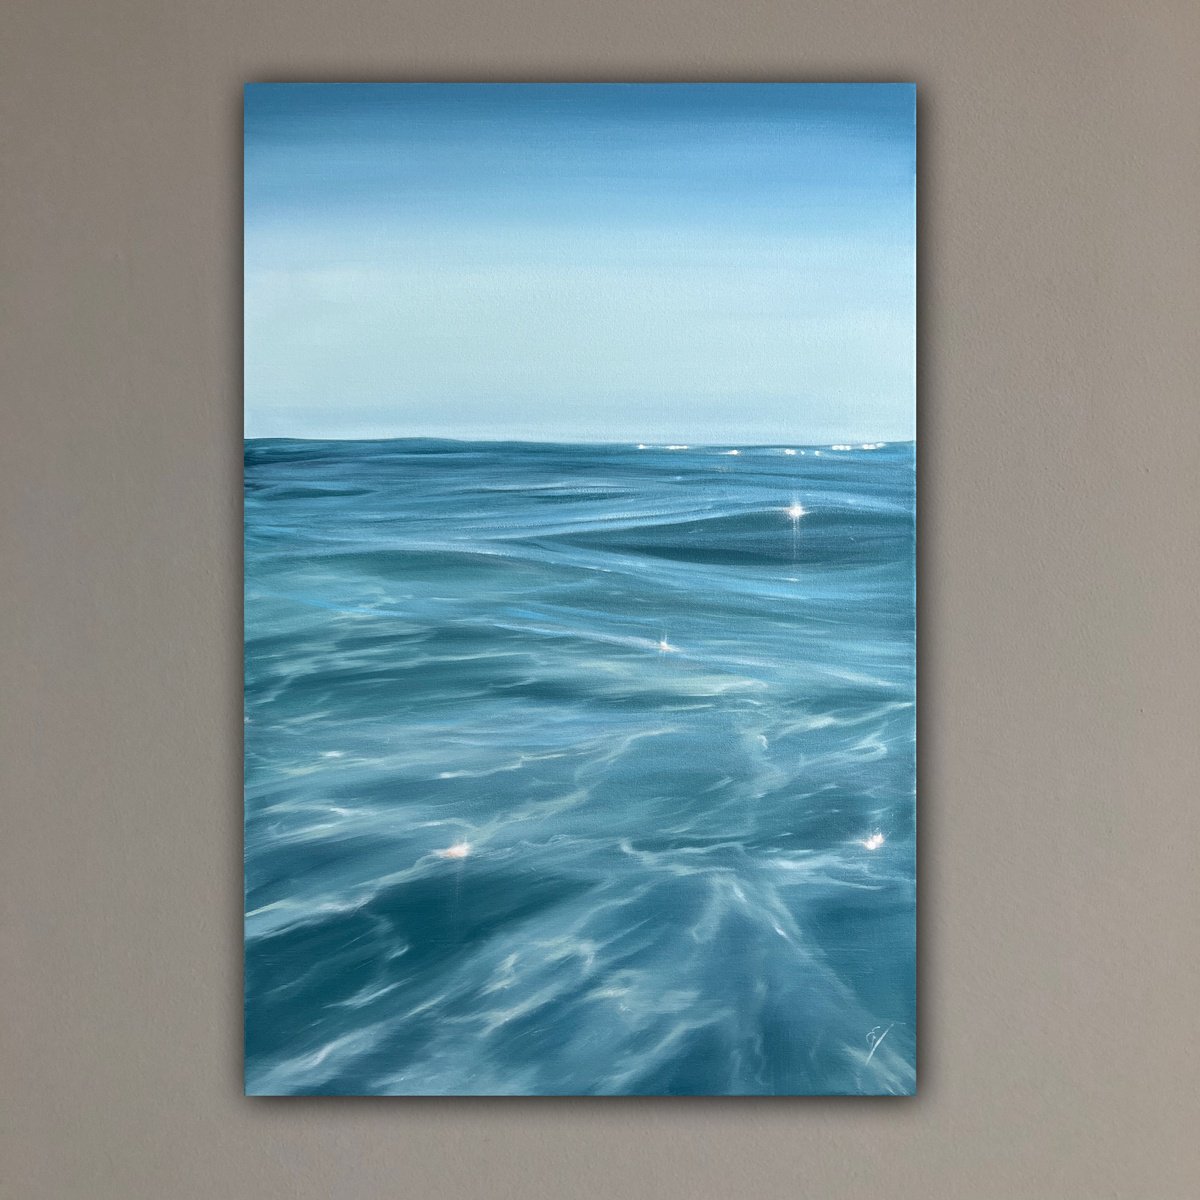 At The Edge - Original Realistic Contemporary Ocean Wave Painting oil on  round 46 canvas - Original Ocean Paintings by Eva Volf